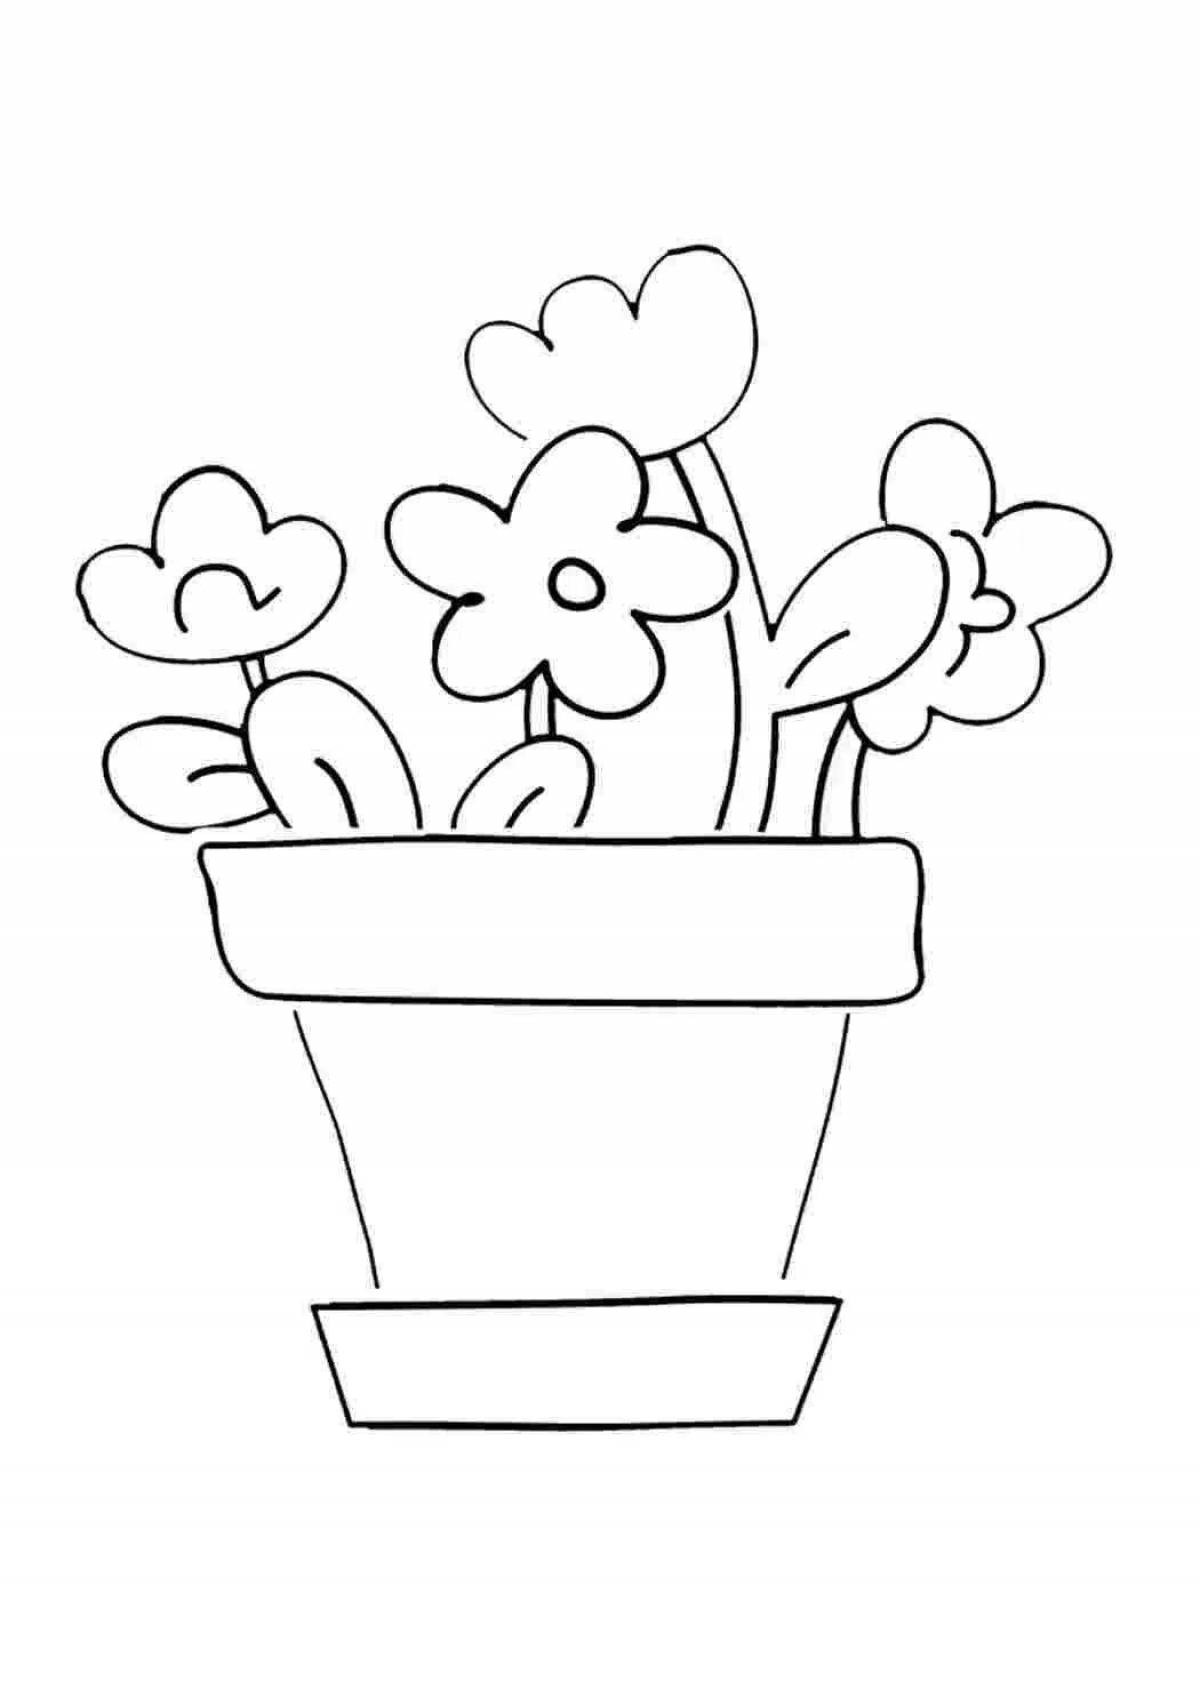 Sweet flower in a pot for 3-4 year olds